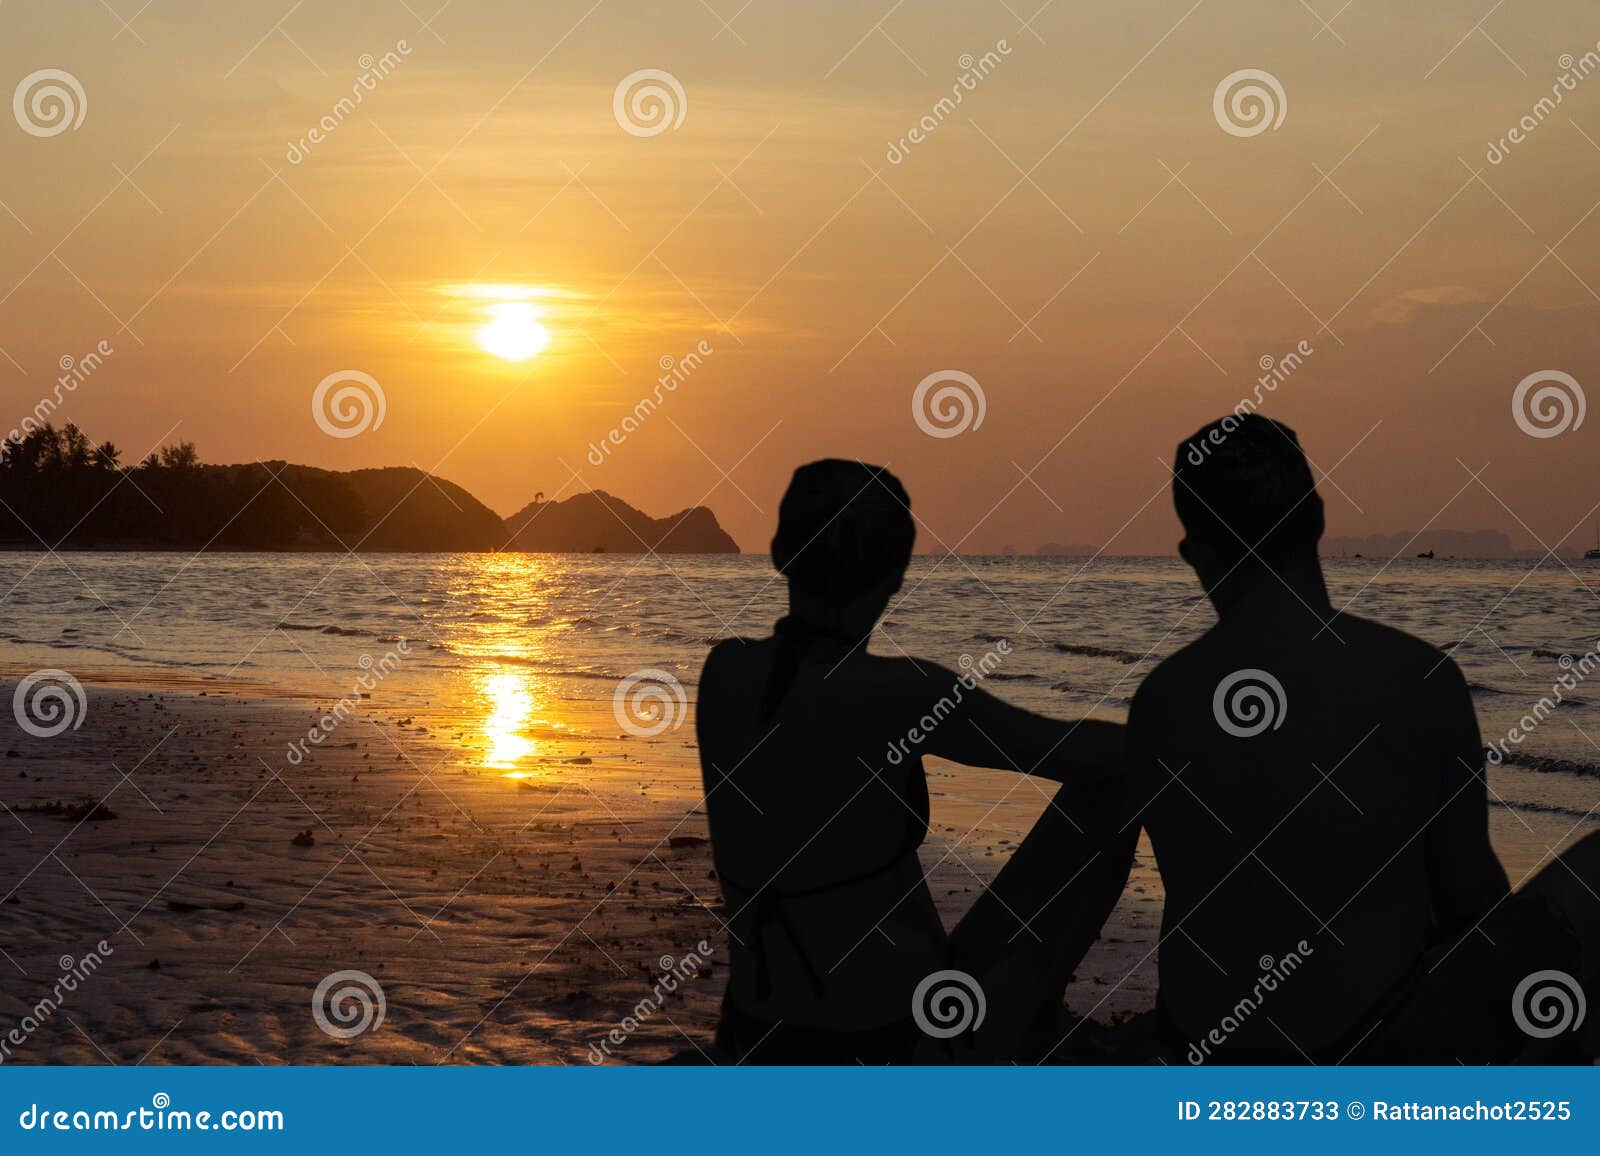 Couple In Love Watching The Sunset Together On Beach Travel Summer Holidays People Silhouette